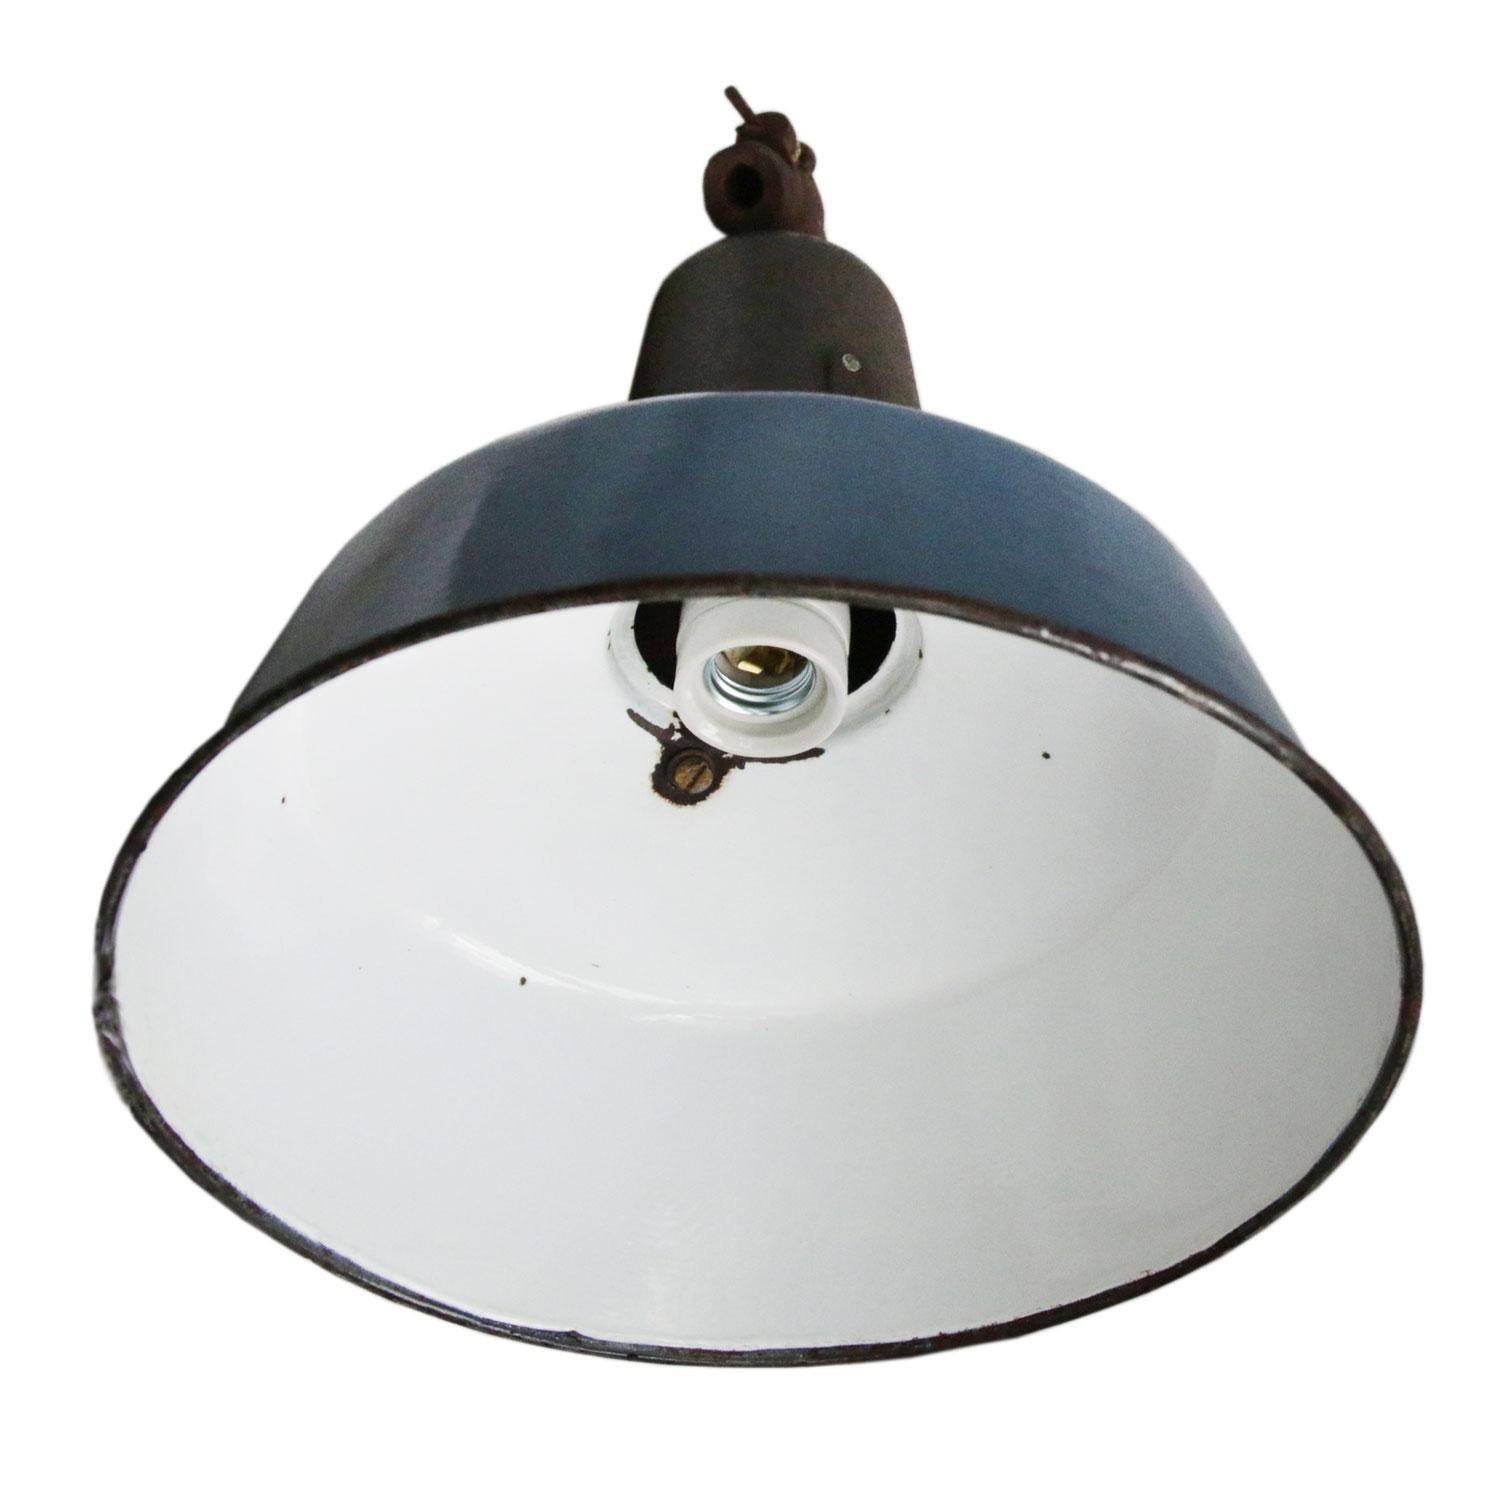 Industrial pendant.
Blue enamel. White interior. Cast iron top.

Weight: 4.0 kg / 8.8 lb

All lamps have been made suitable by international standards for incandescent light bulbs, energy-efficient and LED bulbs. E26/E27 bulb holders and new